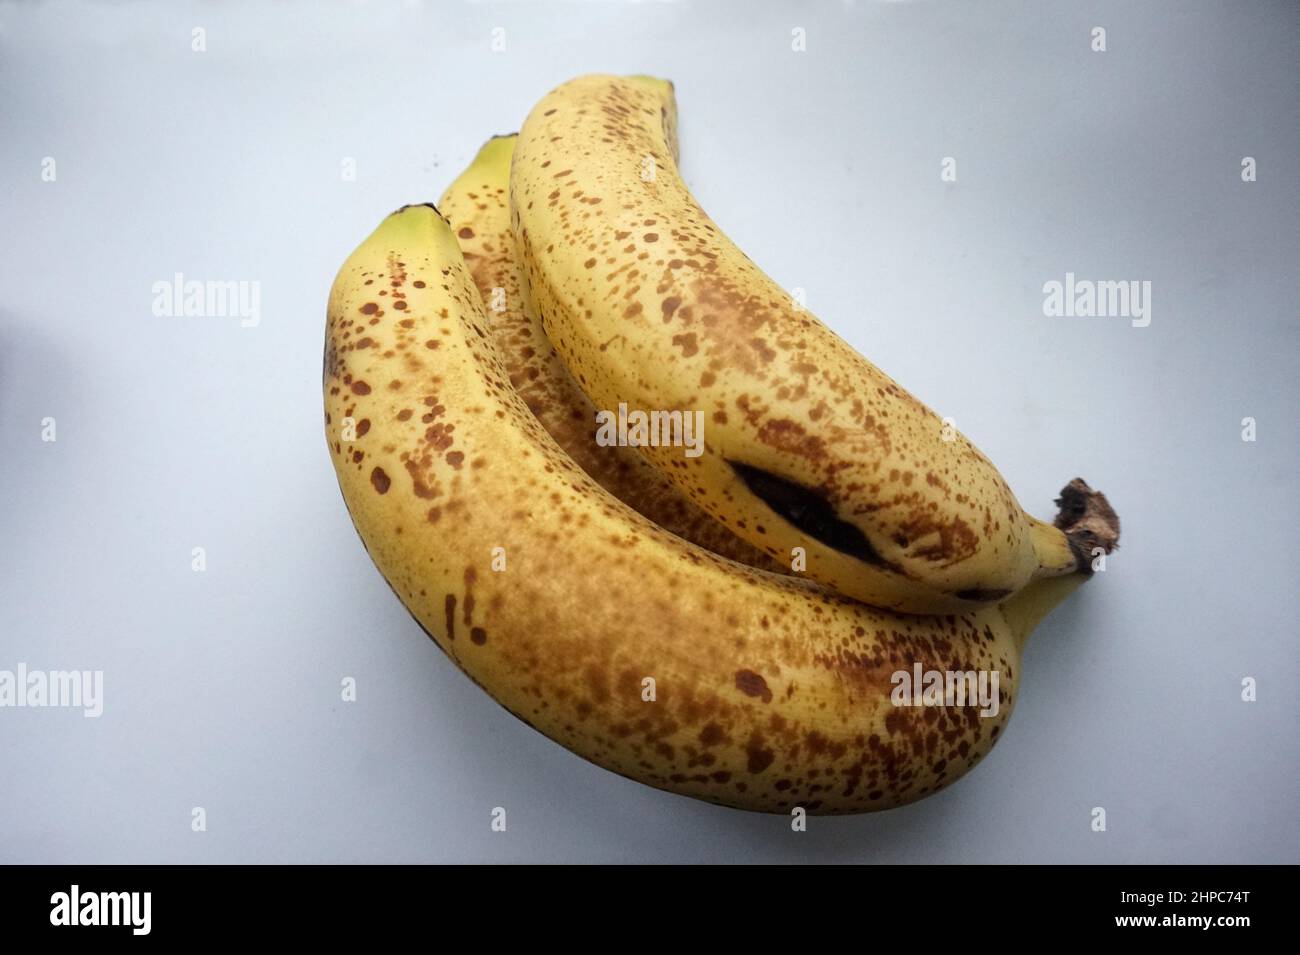 Ripe bananas with brown spots on their skin Stock Photo